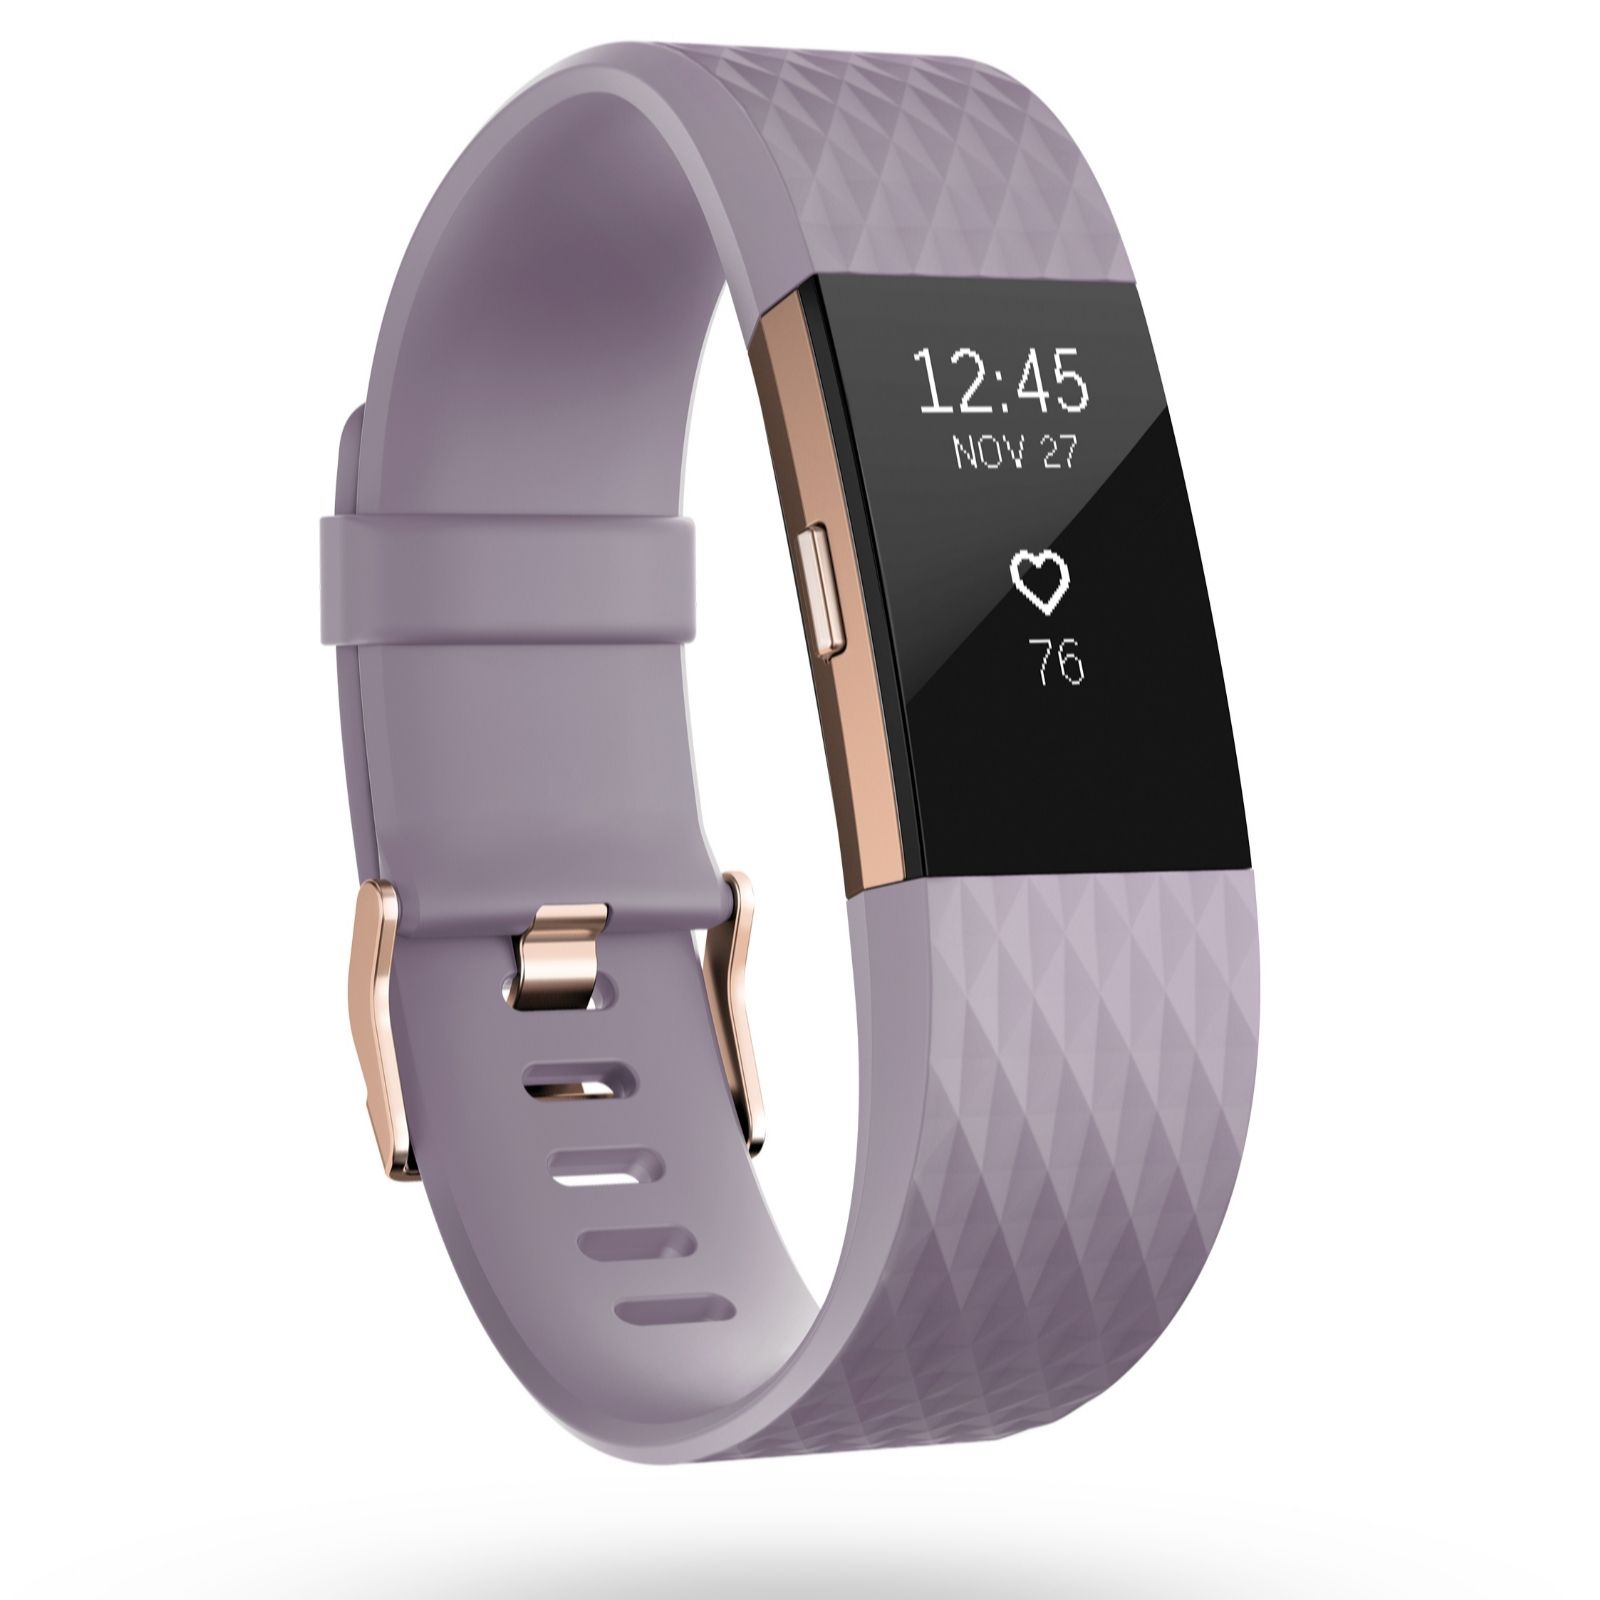 Fitbit Charge 2 Special Edition Activity & Sleep Tracker with HR Monitor - UK